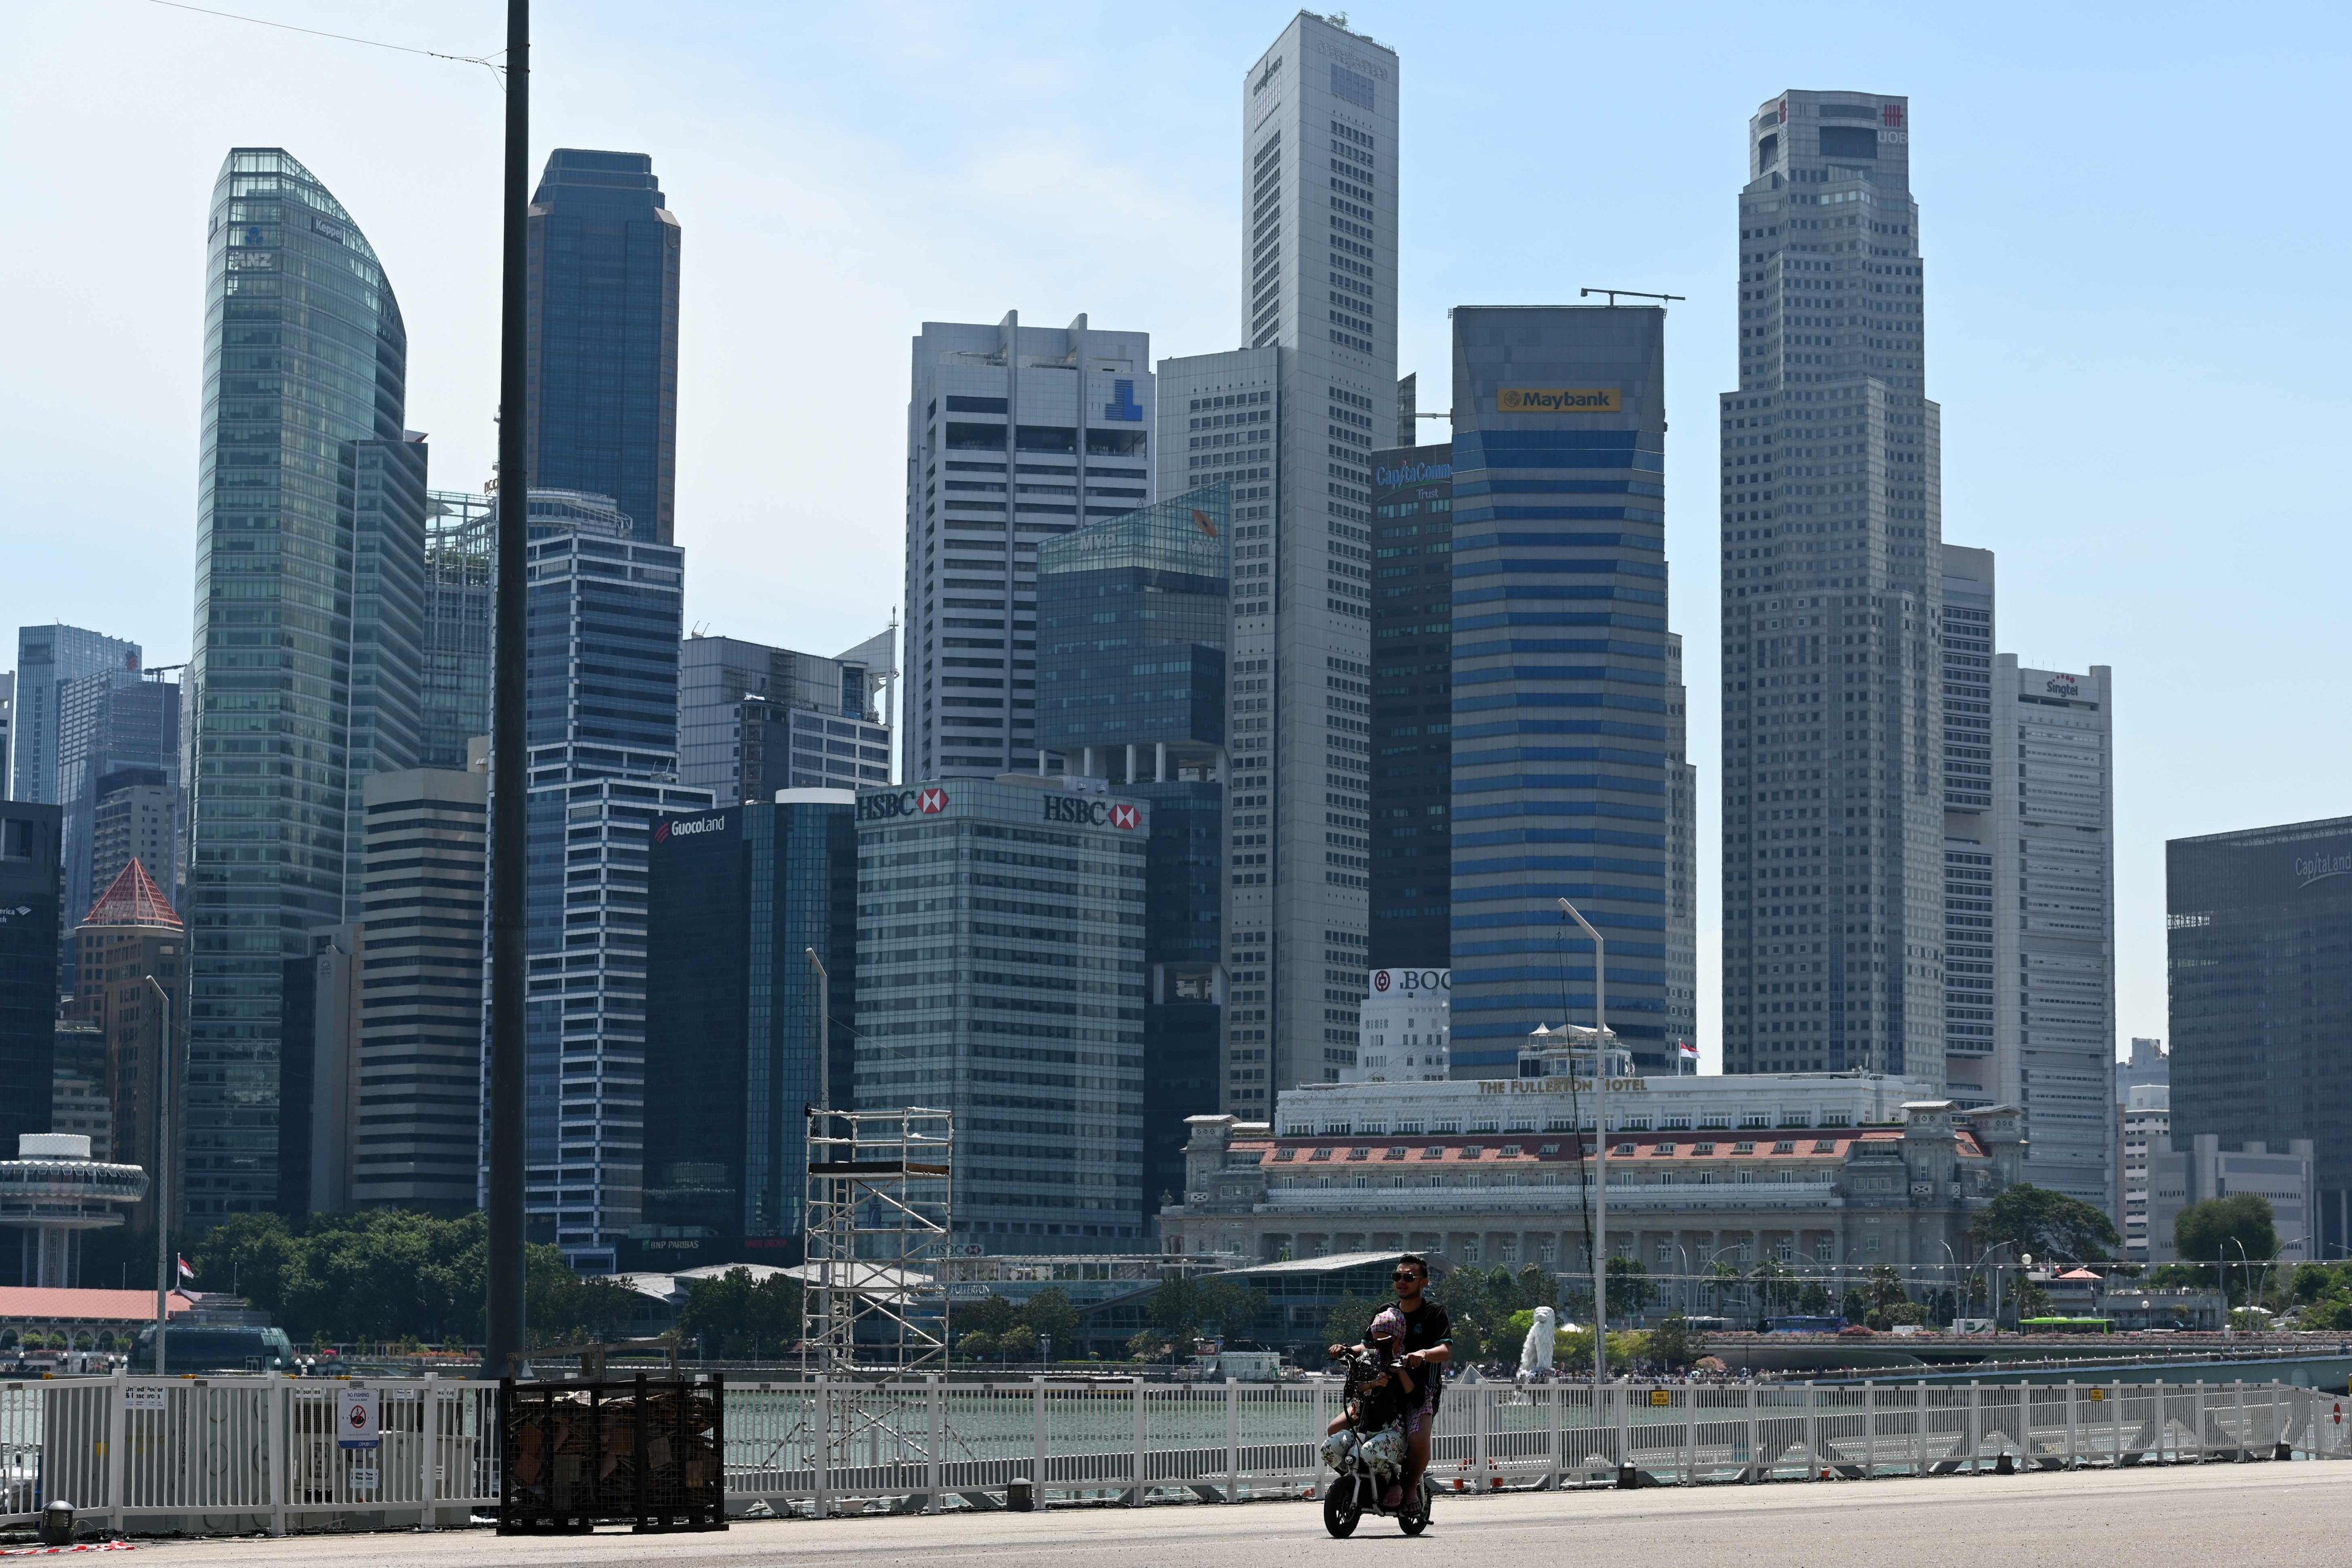 A couple ride on an e-scooter in Marina Bay. The “freak accident” involving the jaywalker and the motorcyclist occurred on Yishun Avenue 1 in northern Singapore. Photo: AFP